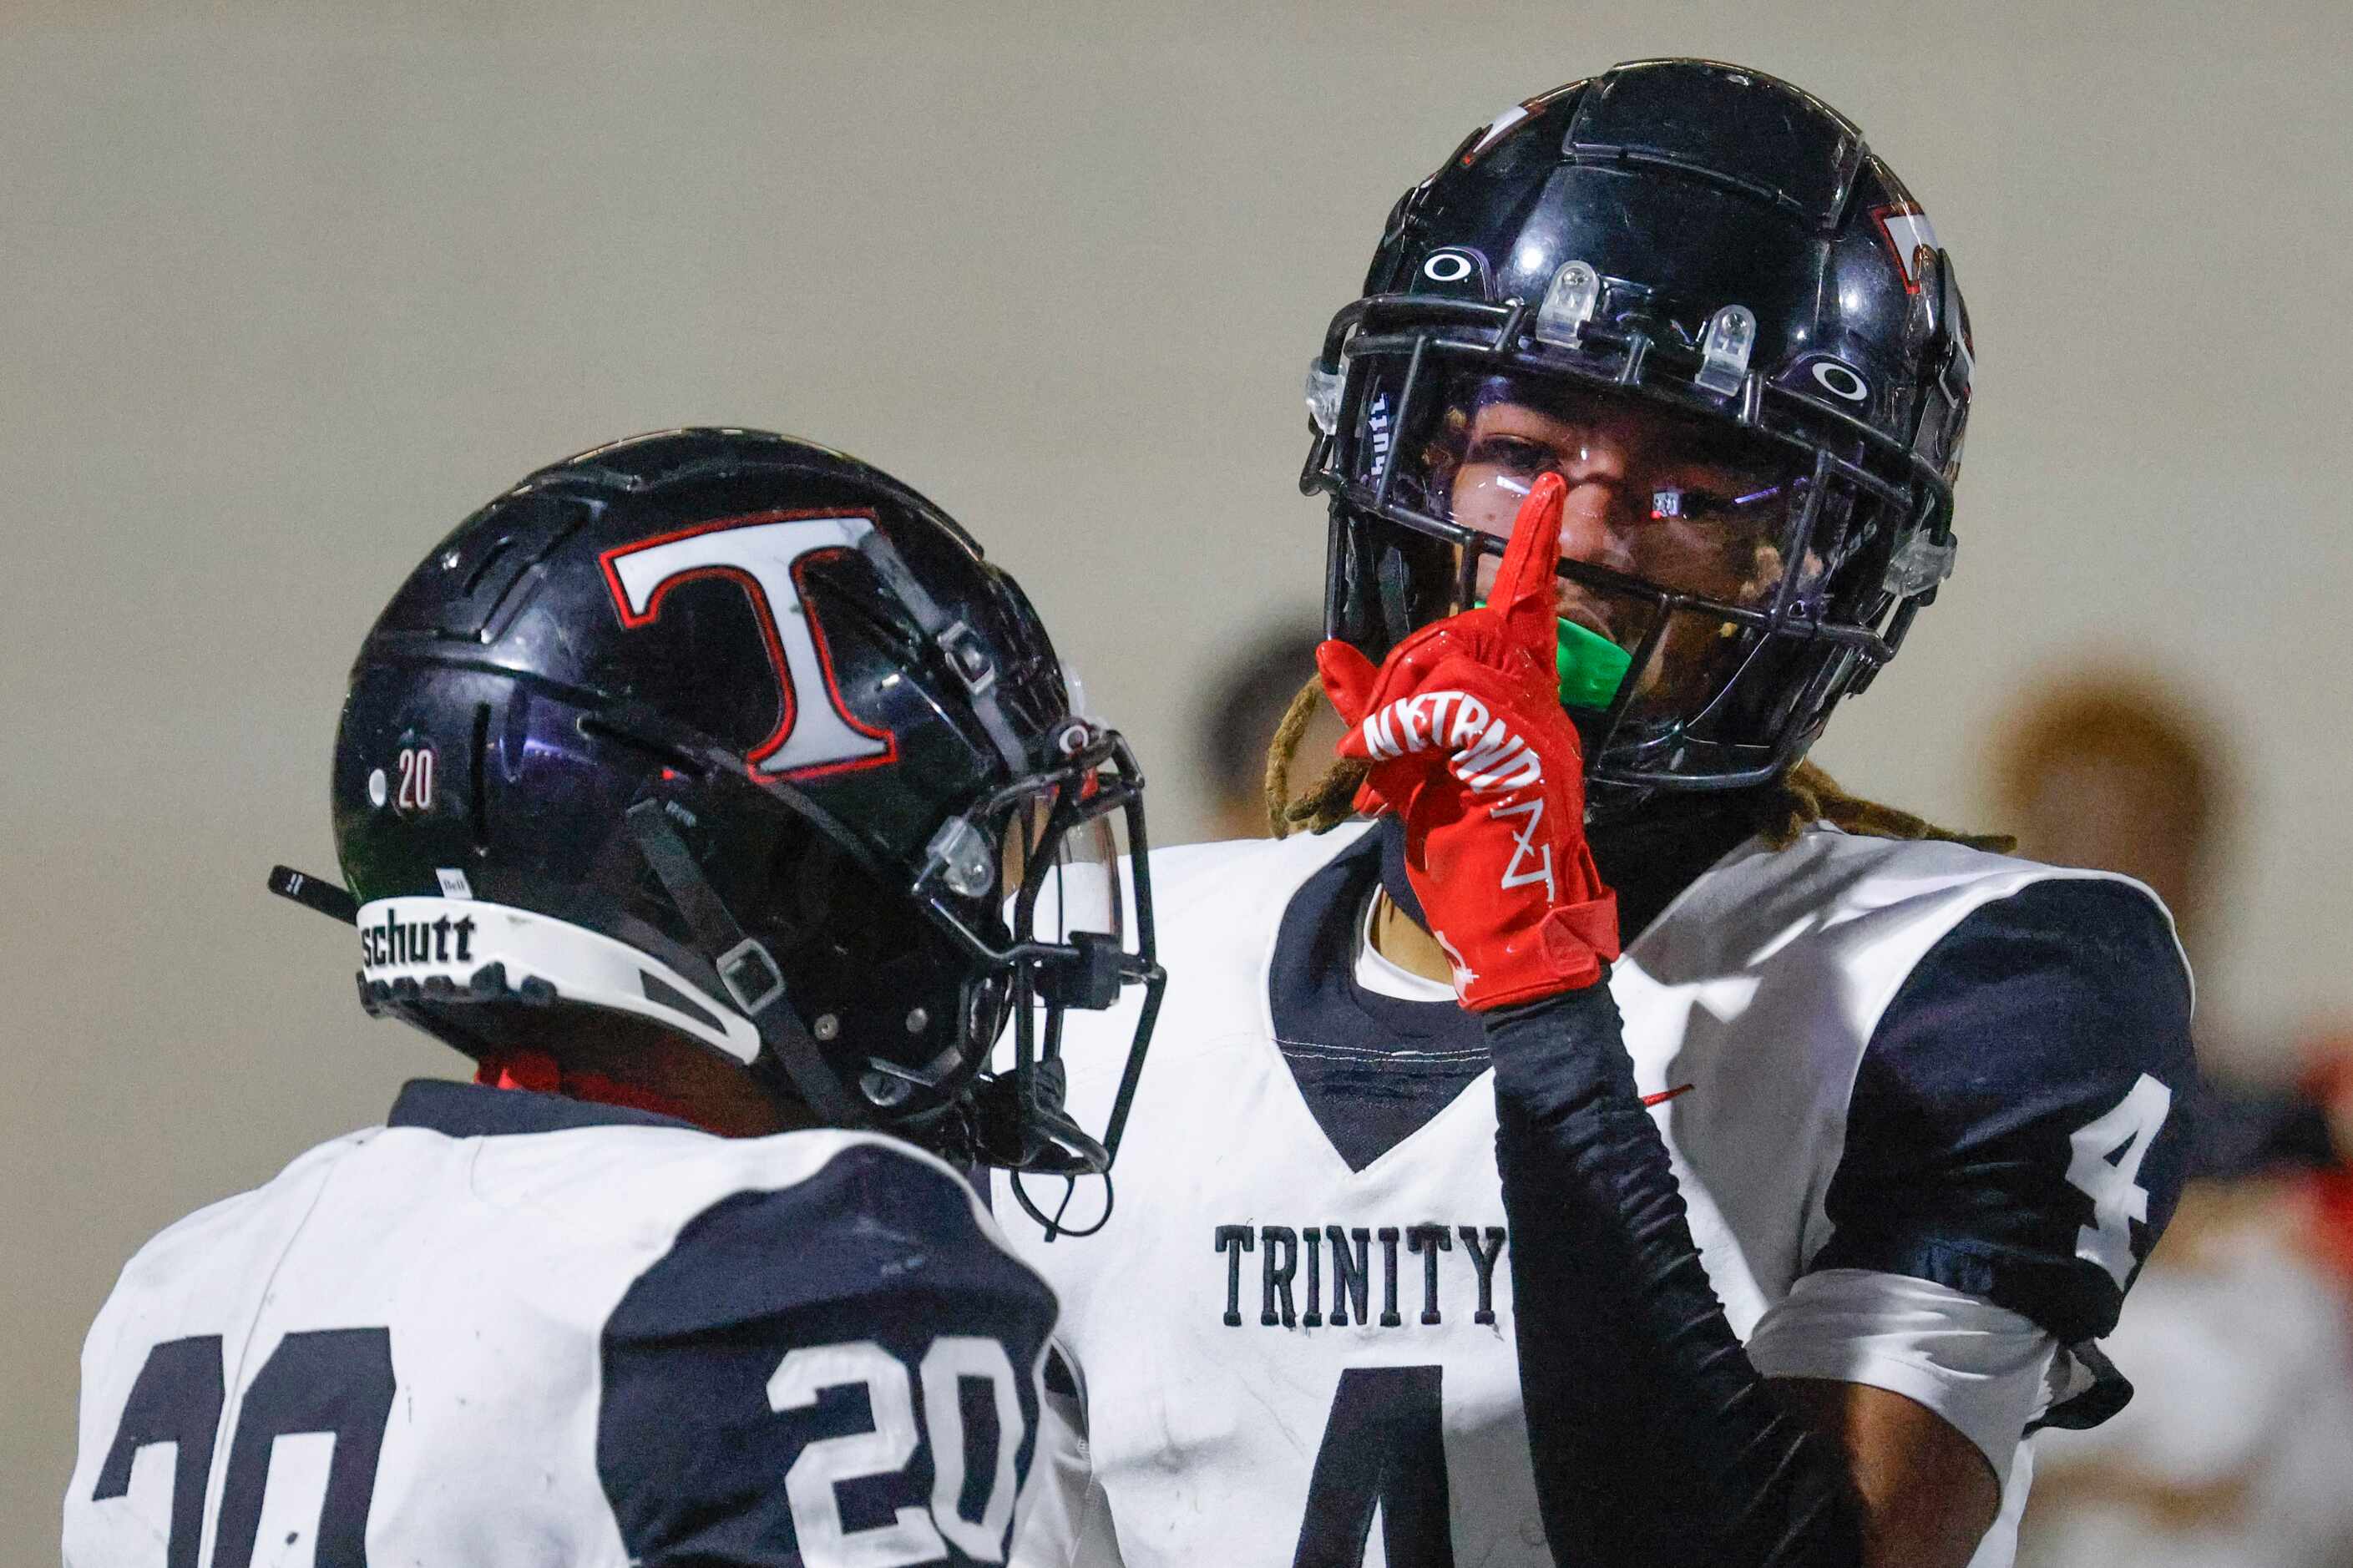 Trinity High’s Jarvis Heimuli celebrates after scoring a touchdown against Crowley High...